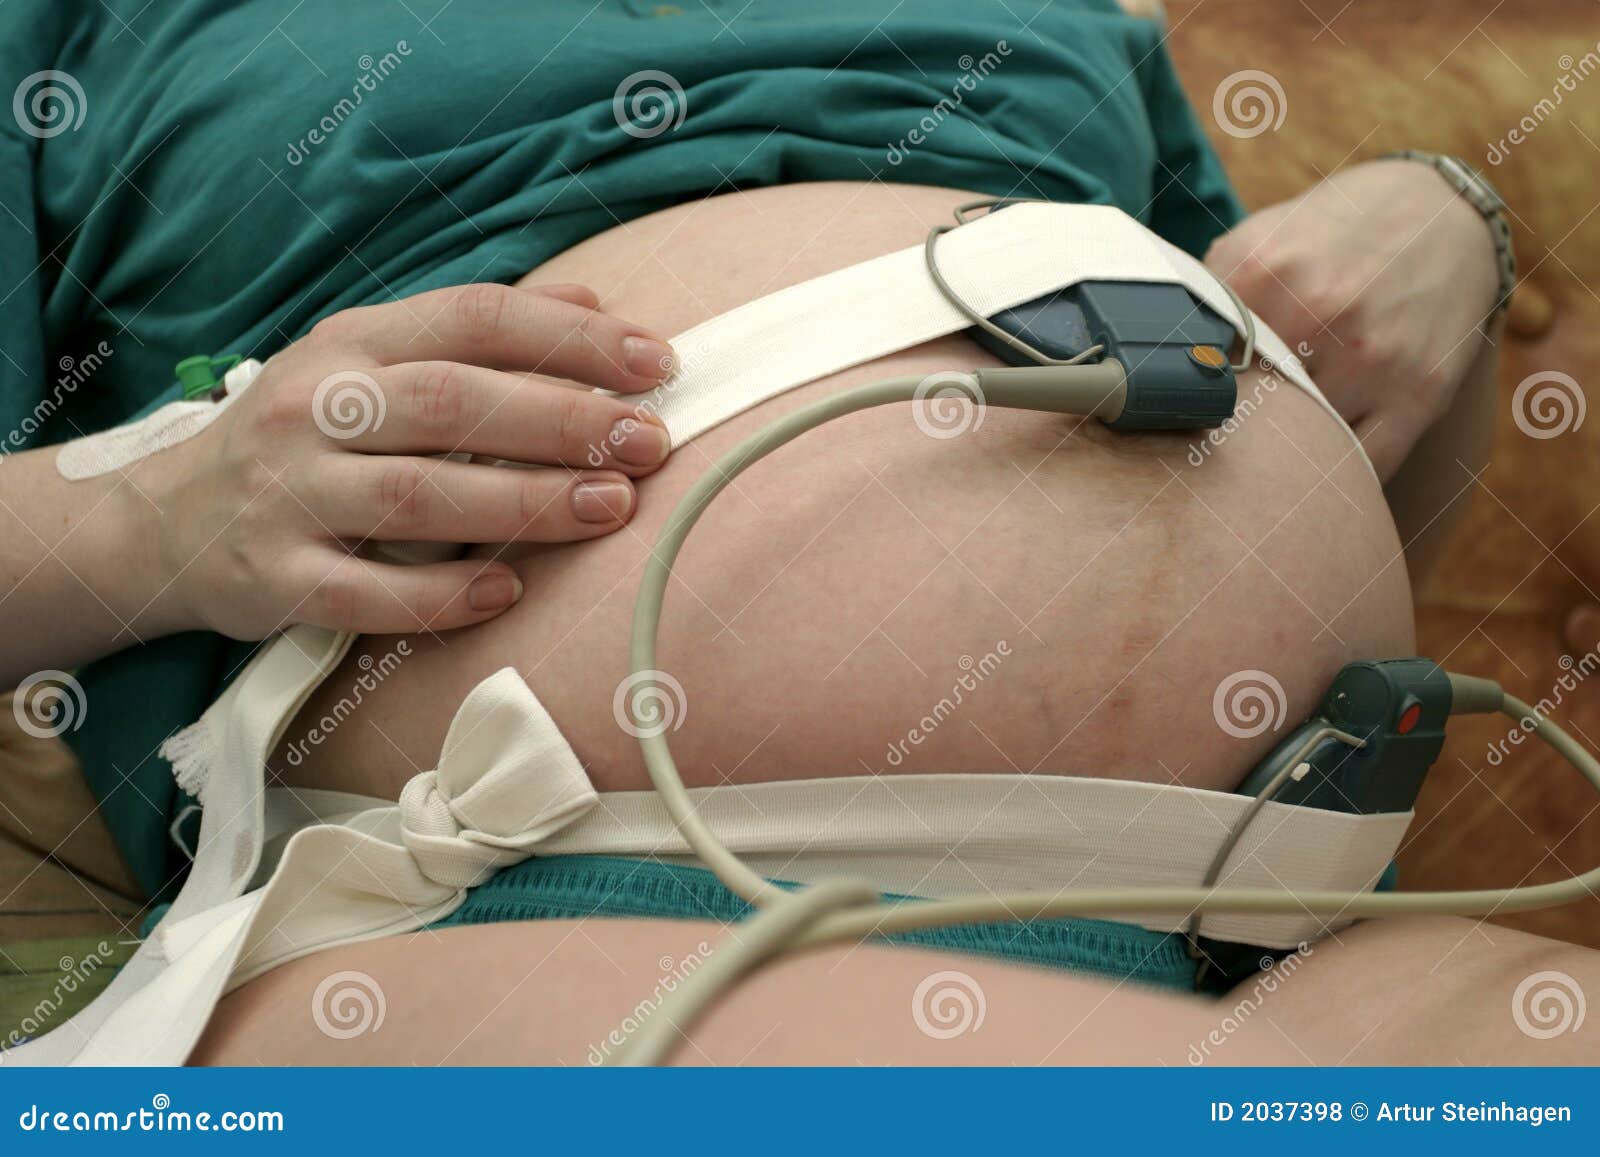 examination during the childbirth